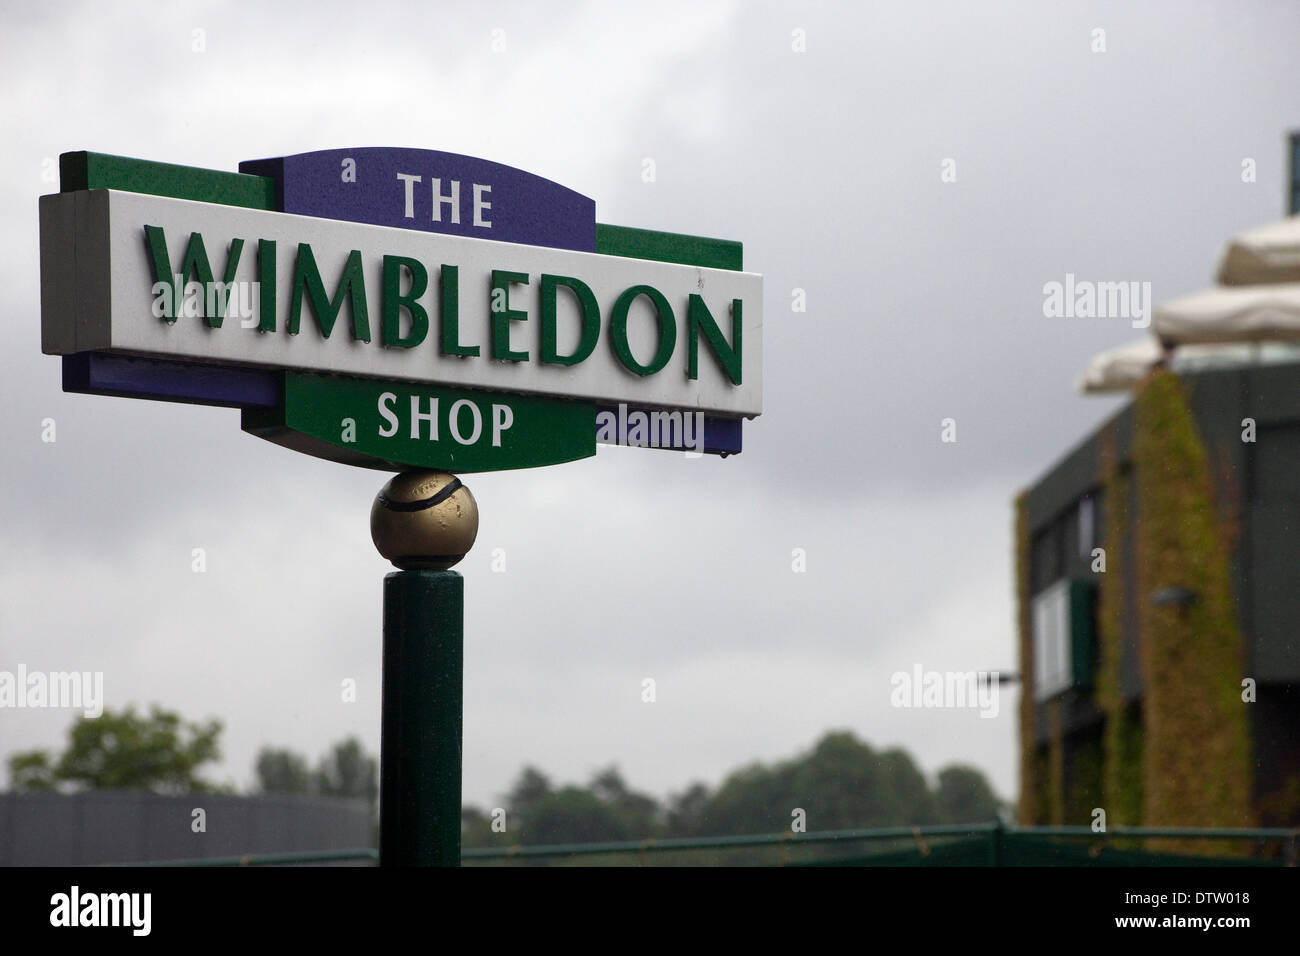 The Wimbledon Shop Sign in front of Grey sky Stock Photo